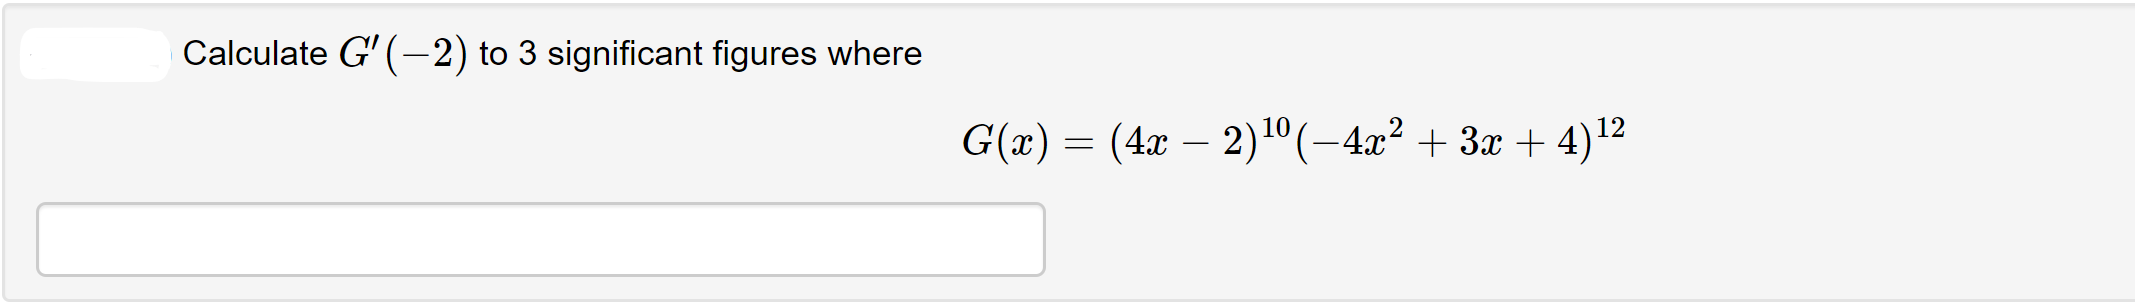 Calculate G' (-2) to 3 significant figures where
G(x) = (4x – 2)1º (-4x² + 3x + 4)12
